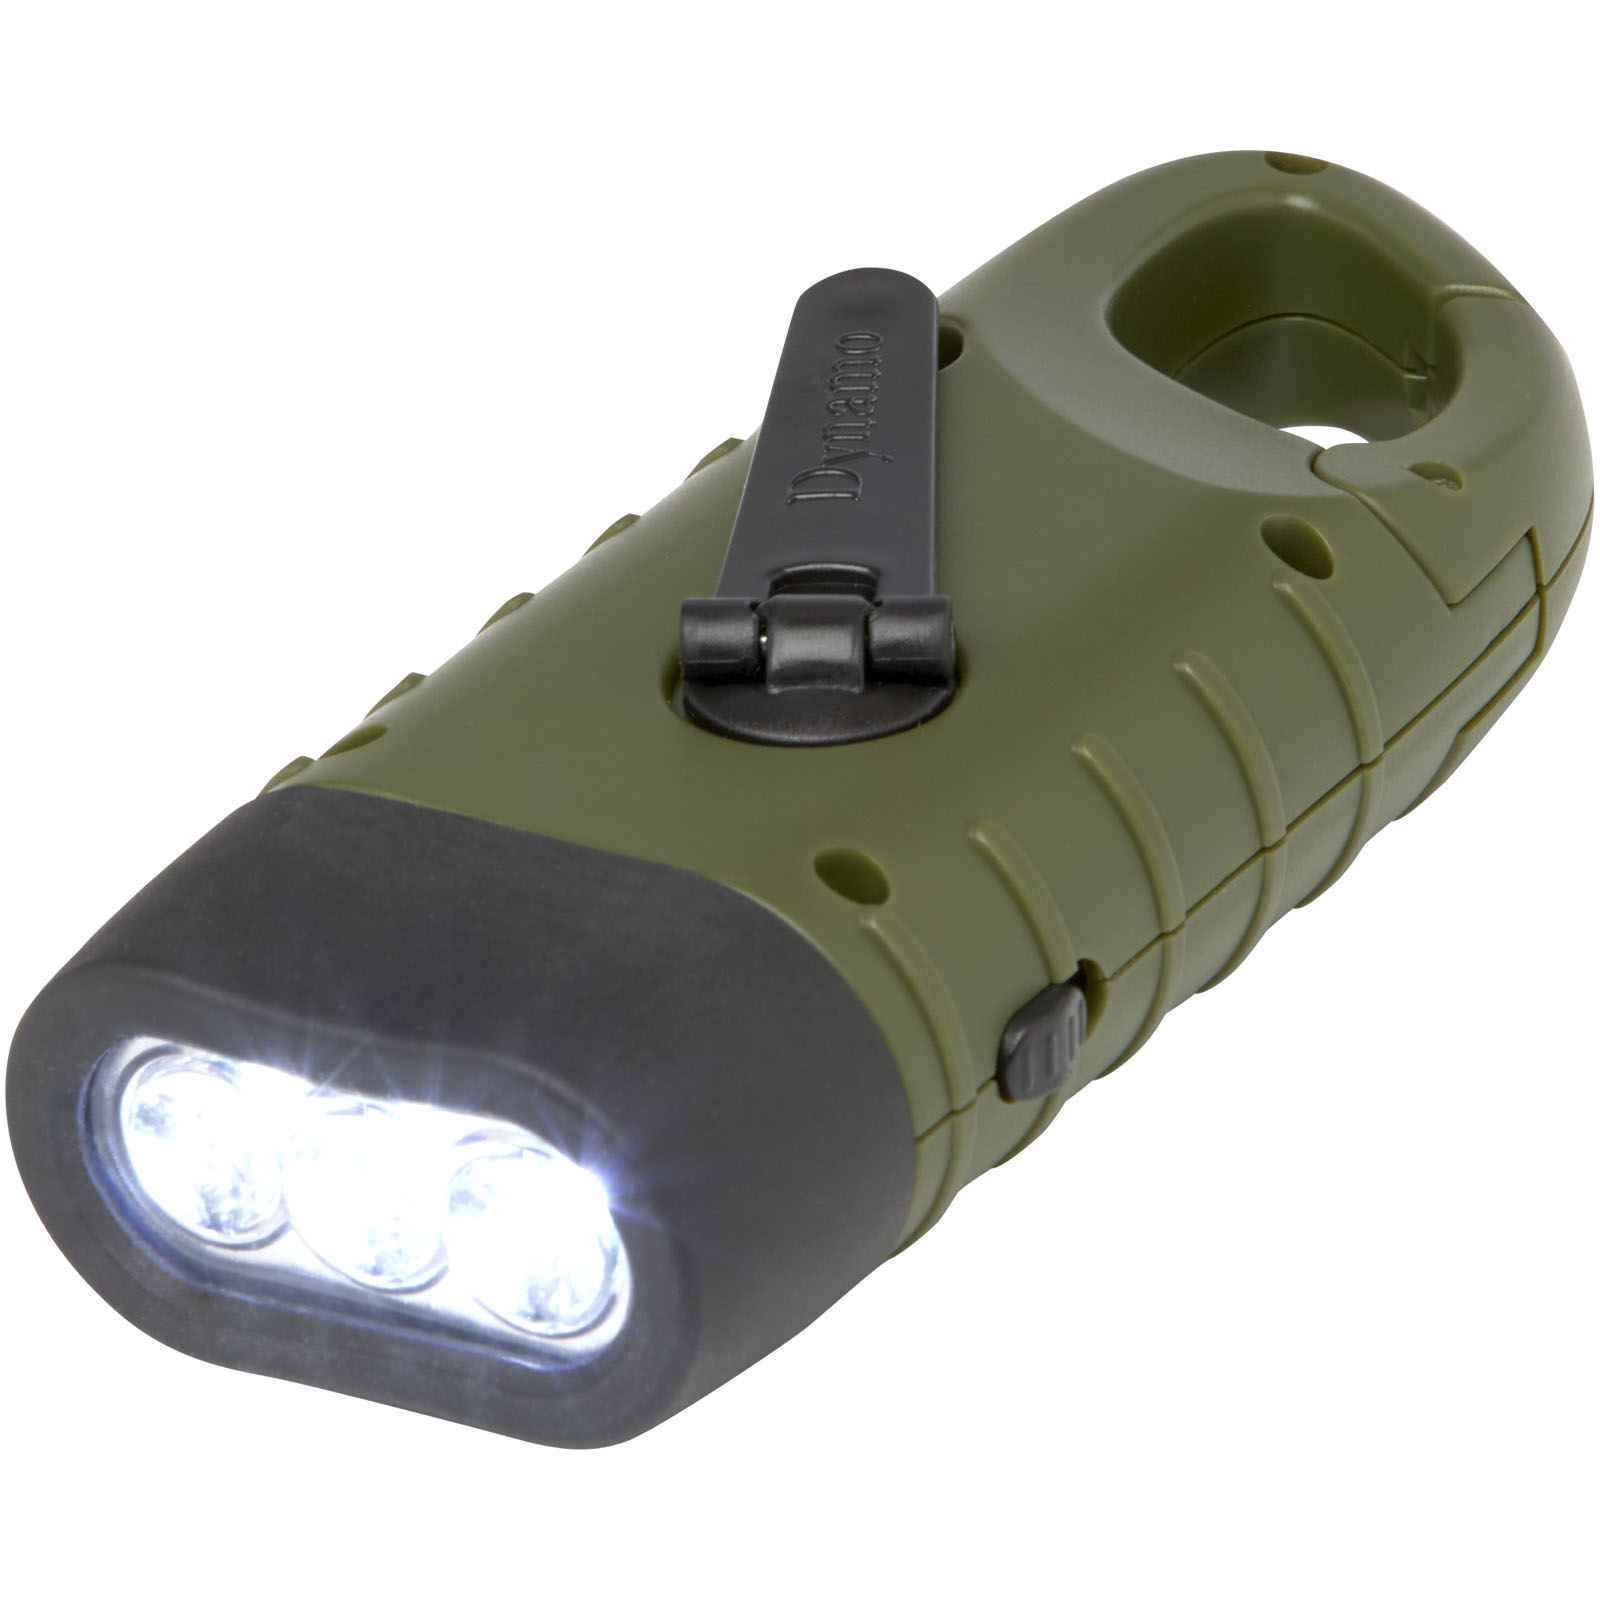 Helios flashlight made from recycled plastic, powered by solar and dynamo energy, and comes with a carabiner - Poundbury